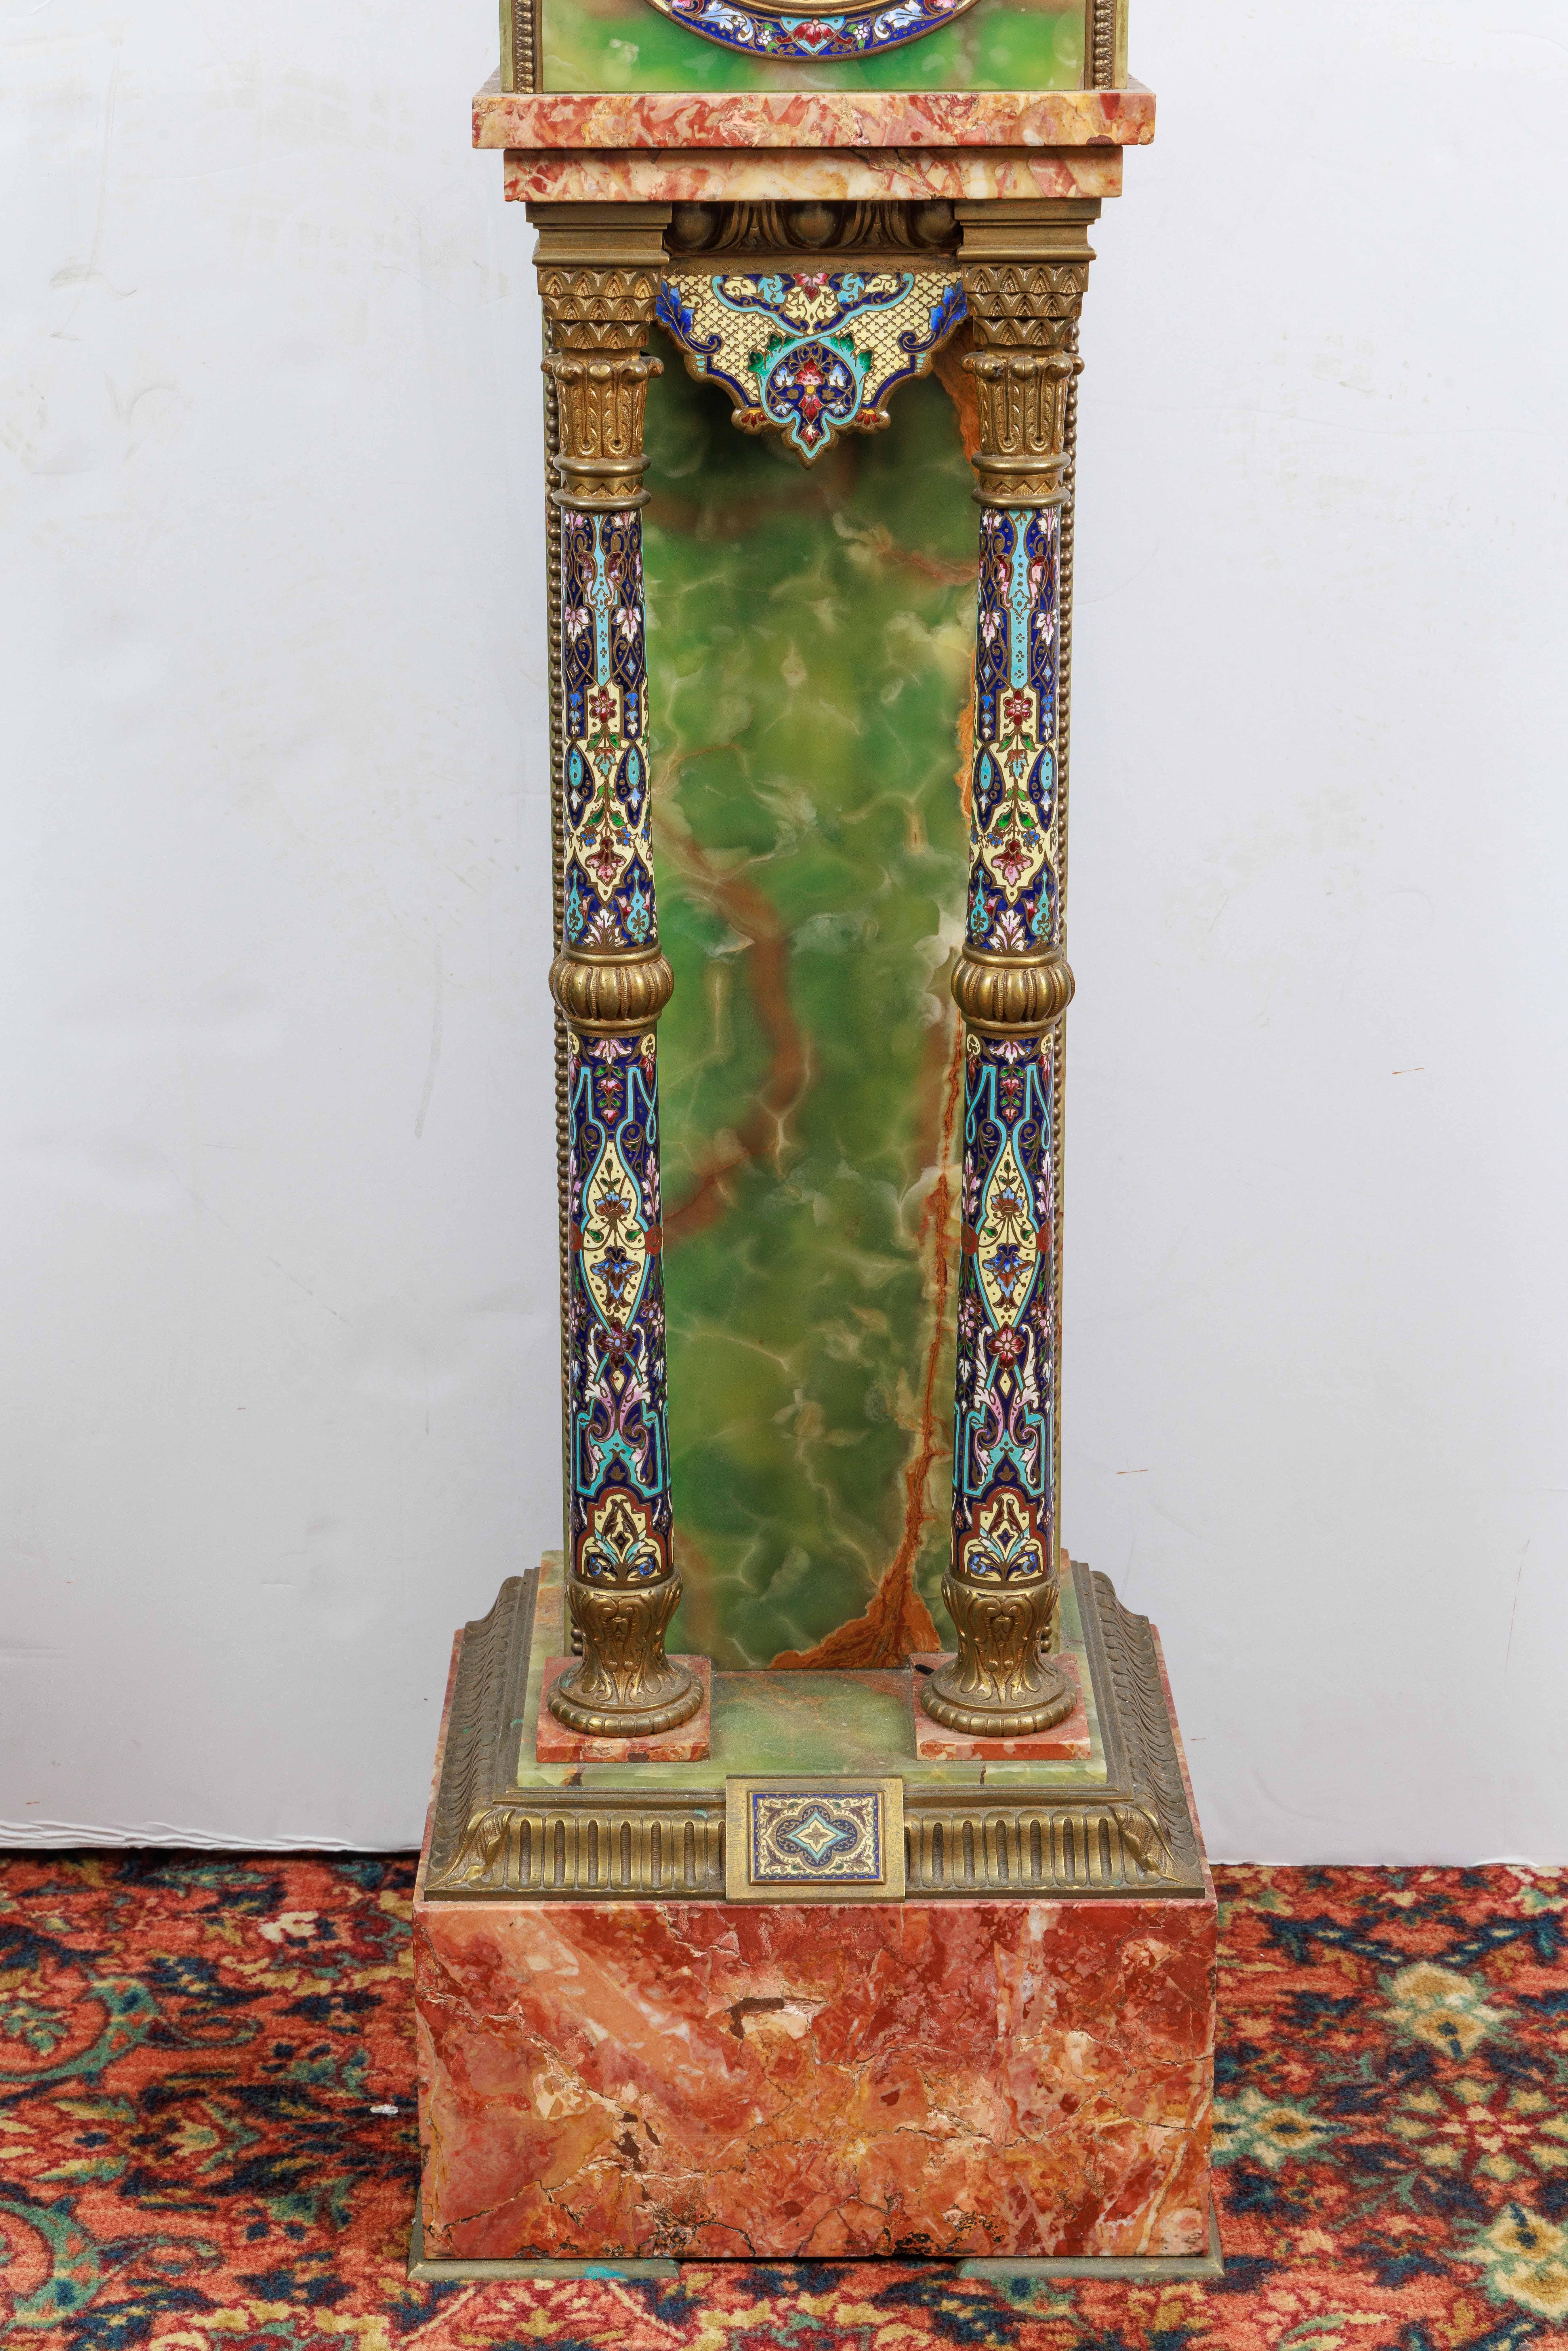 A French Gilt-Bronze, Champleve / Cloisonne Enamel, Green Onyx, and Pink Marble Pedestal Clock, C. 1880.

With a 5½-inch dial with cream enamel, the case with gilt-bronze mounts and pillars decorated with polychrome champleve enamel.

Overall in